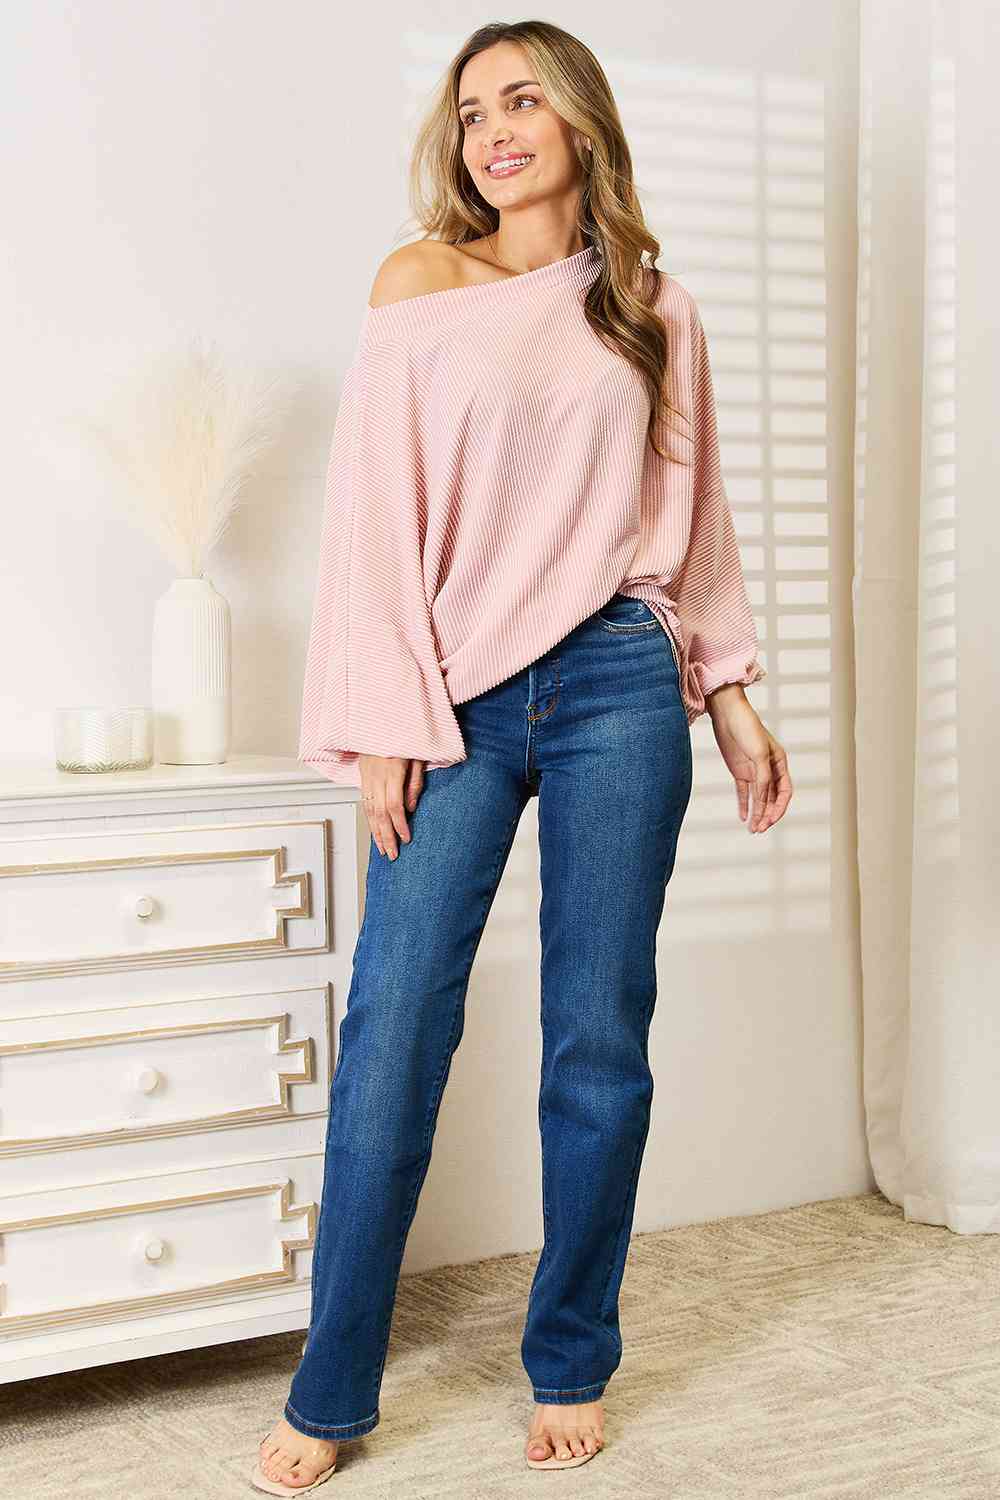 Ribbed Long Sleeve Top in Dusty PinkTopDouble Take